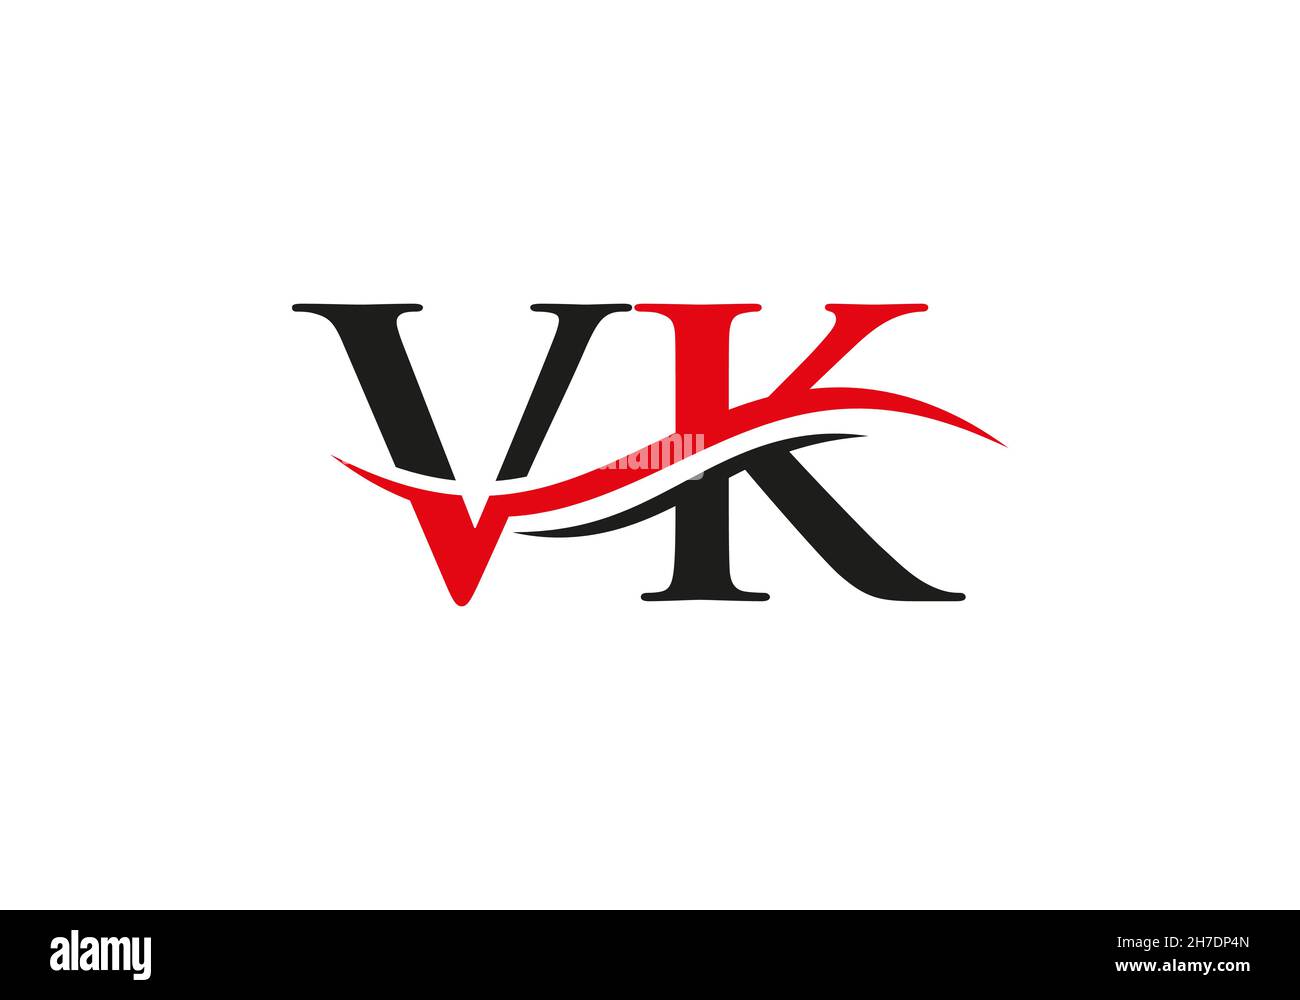 Vk Banner designs, themes, templates and downloadable graphic